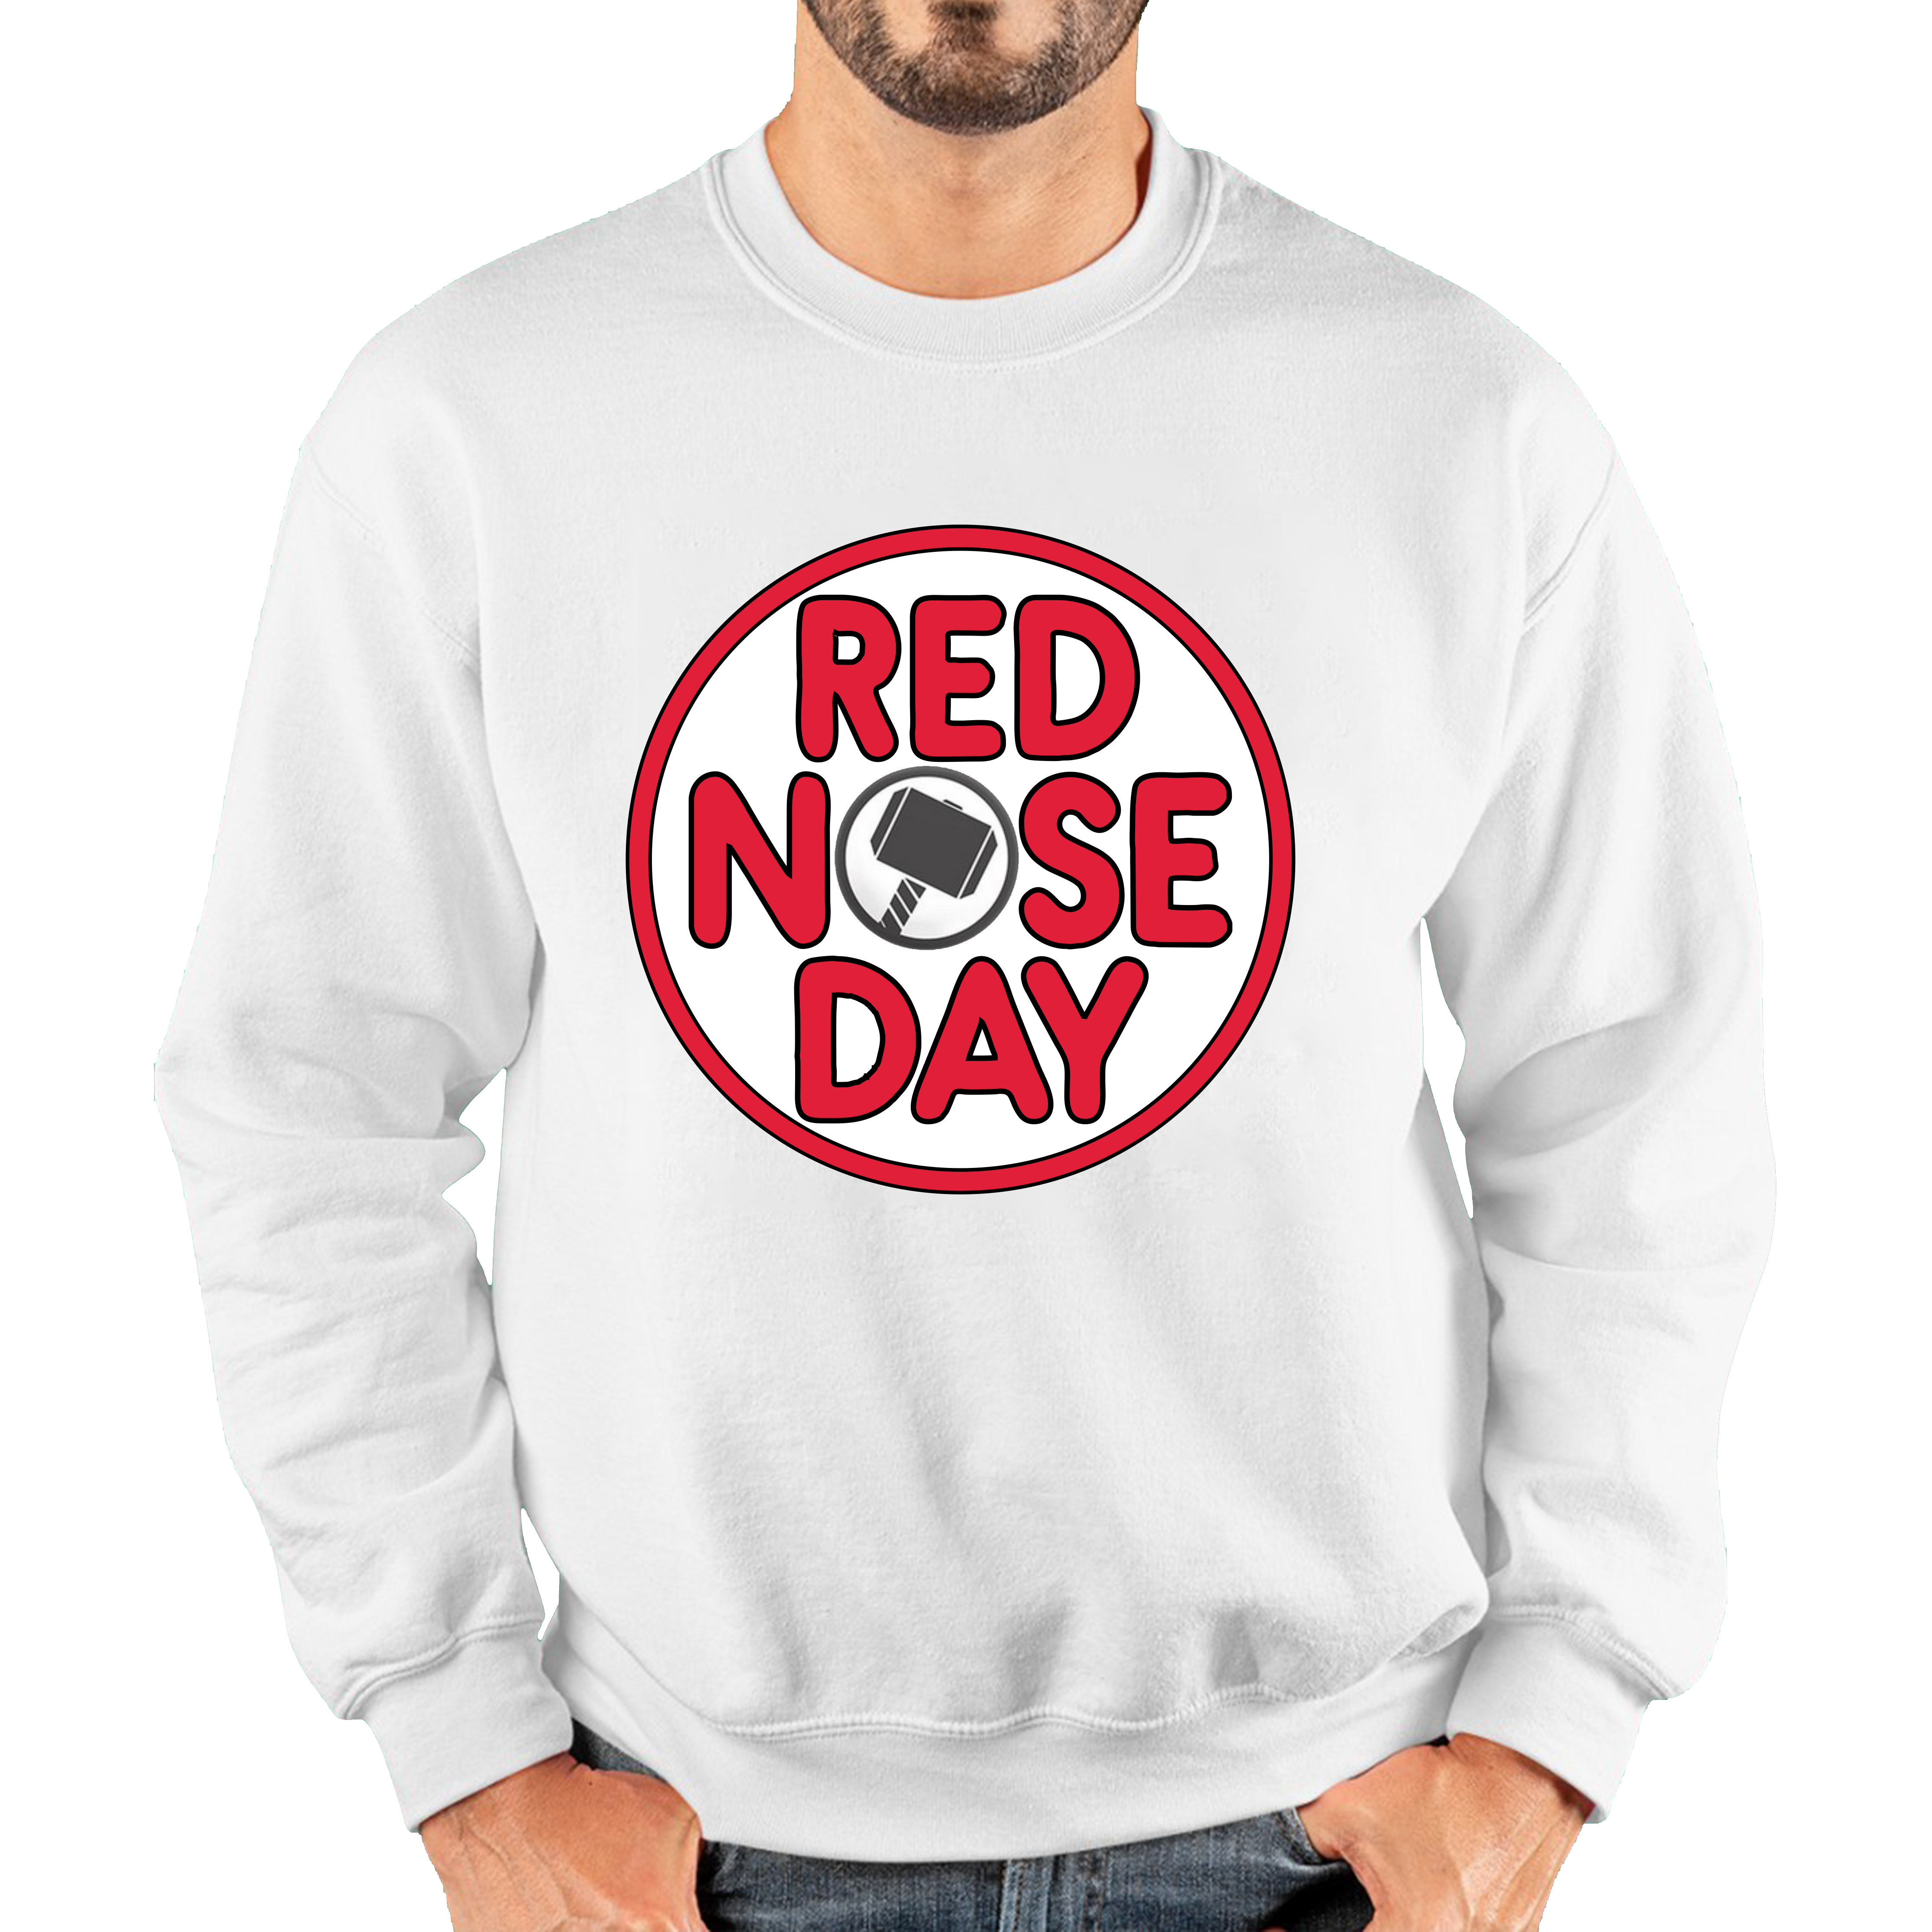 Marvel Avenger Thor Hammer Red Nose Day Adult Sweatshirt. 50% Goes To Charity